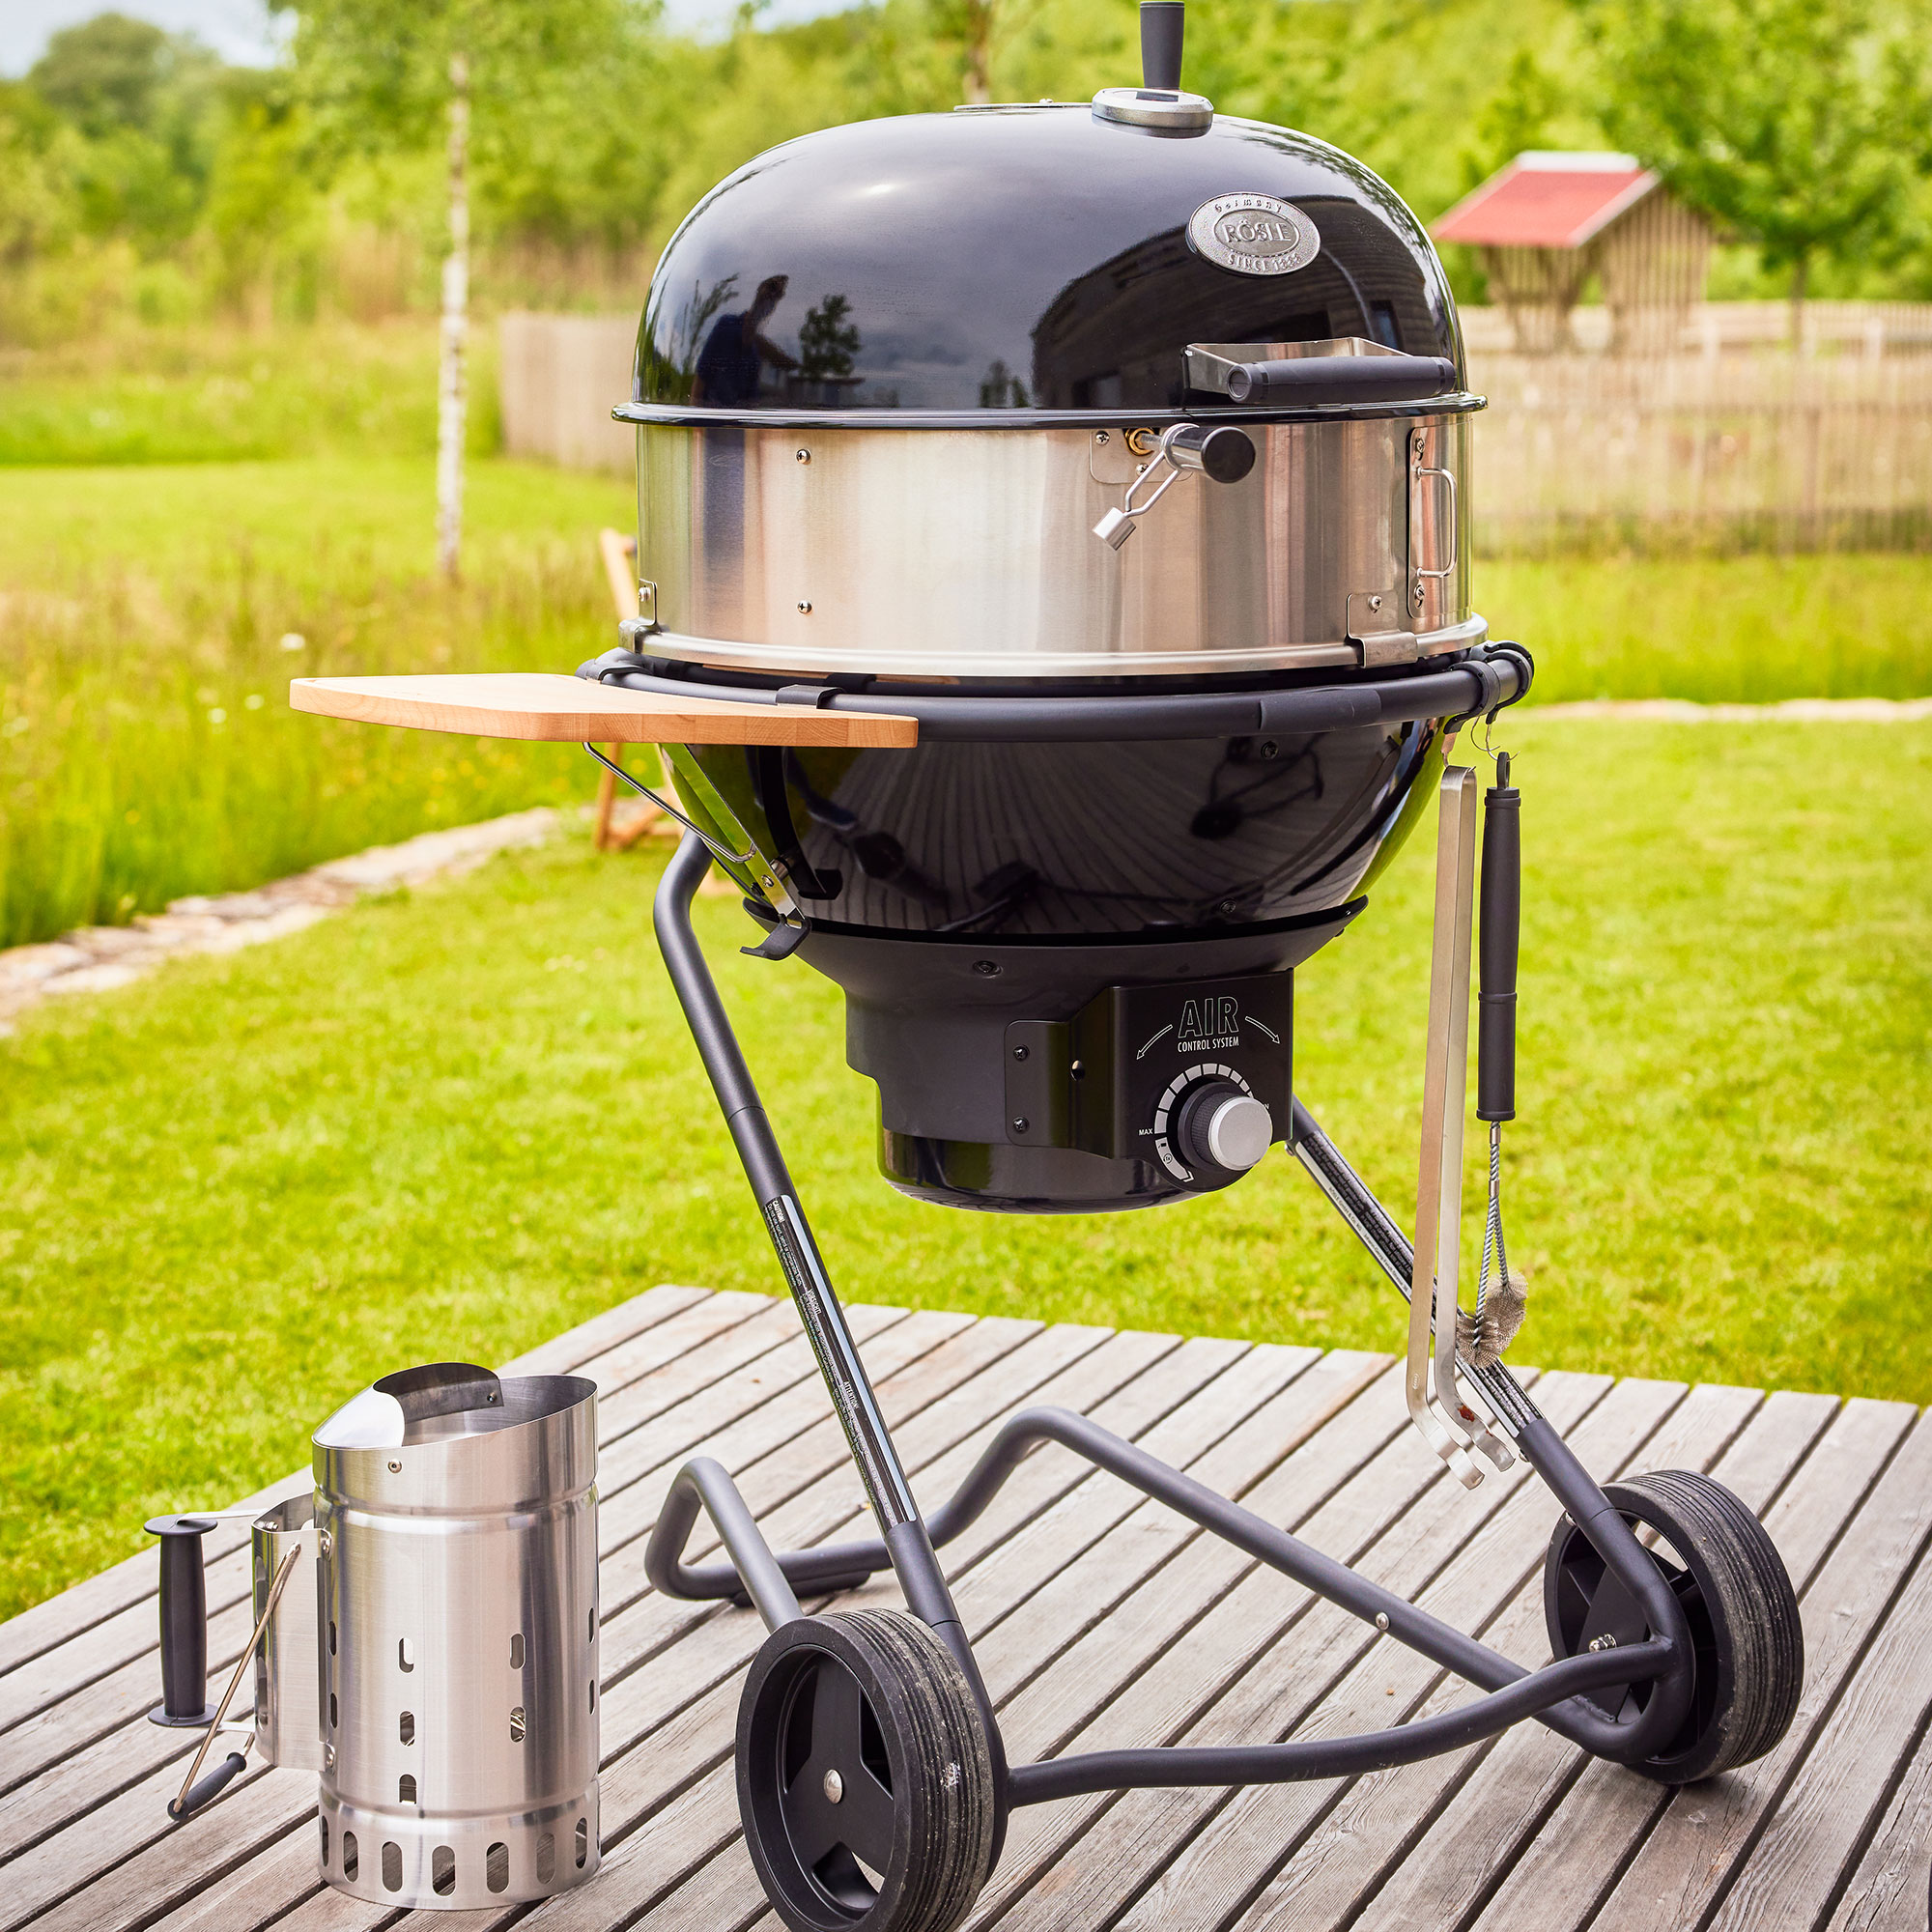 Charcoal kettle grill No.1 F60 AIR PRO VARIO+